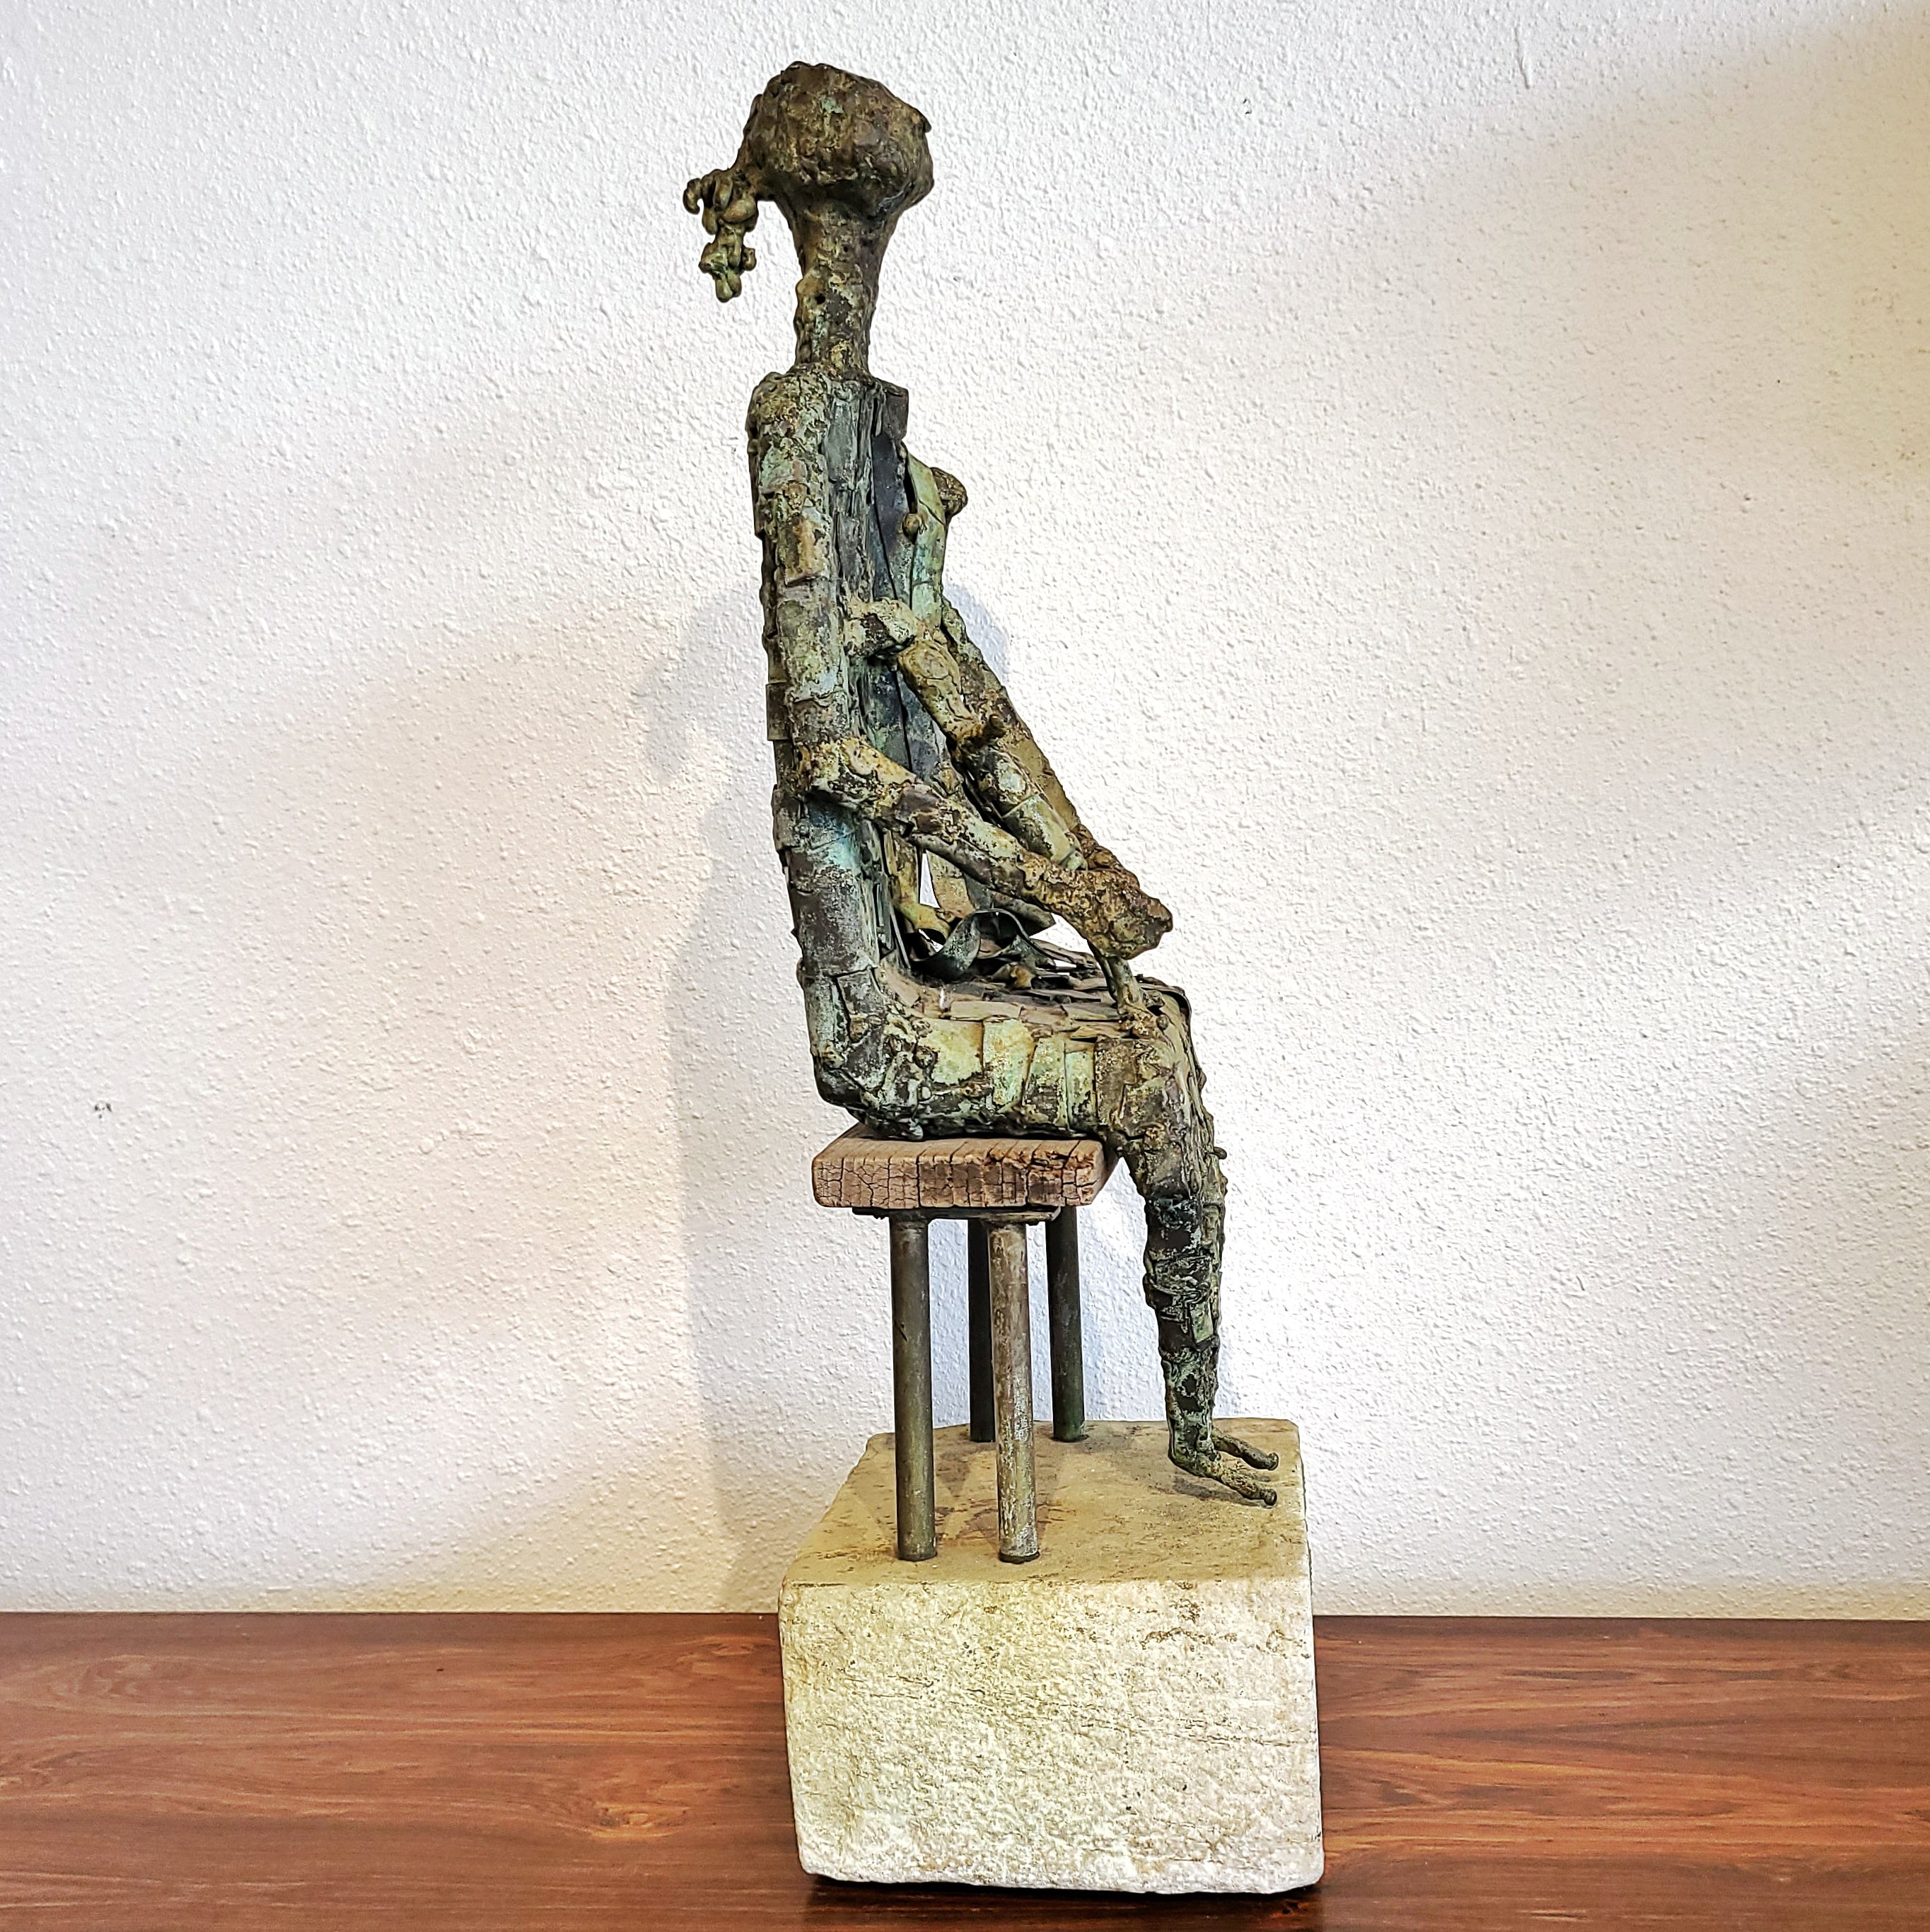 MIXED MEDIA MOTHER AND CHILD SCULPTURE SIGNED AND DATED 'H.W. '57'